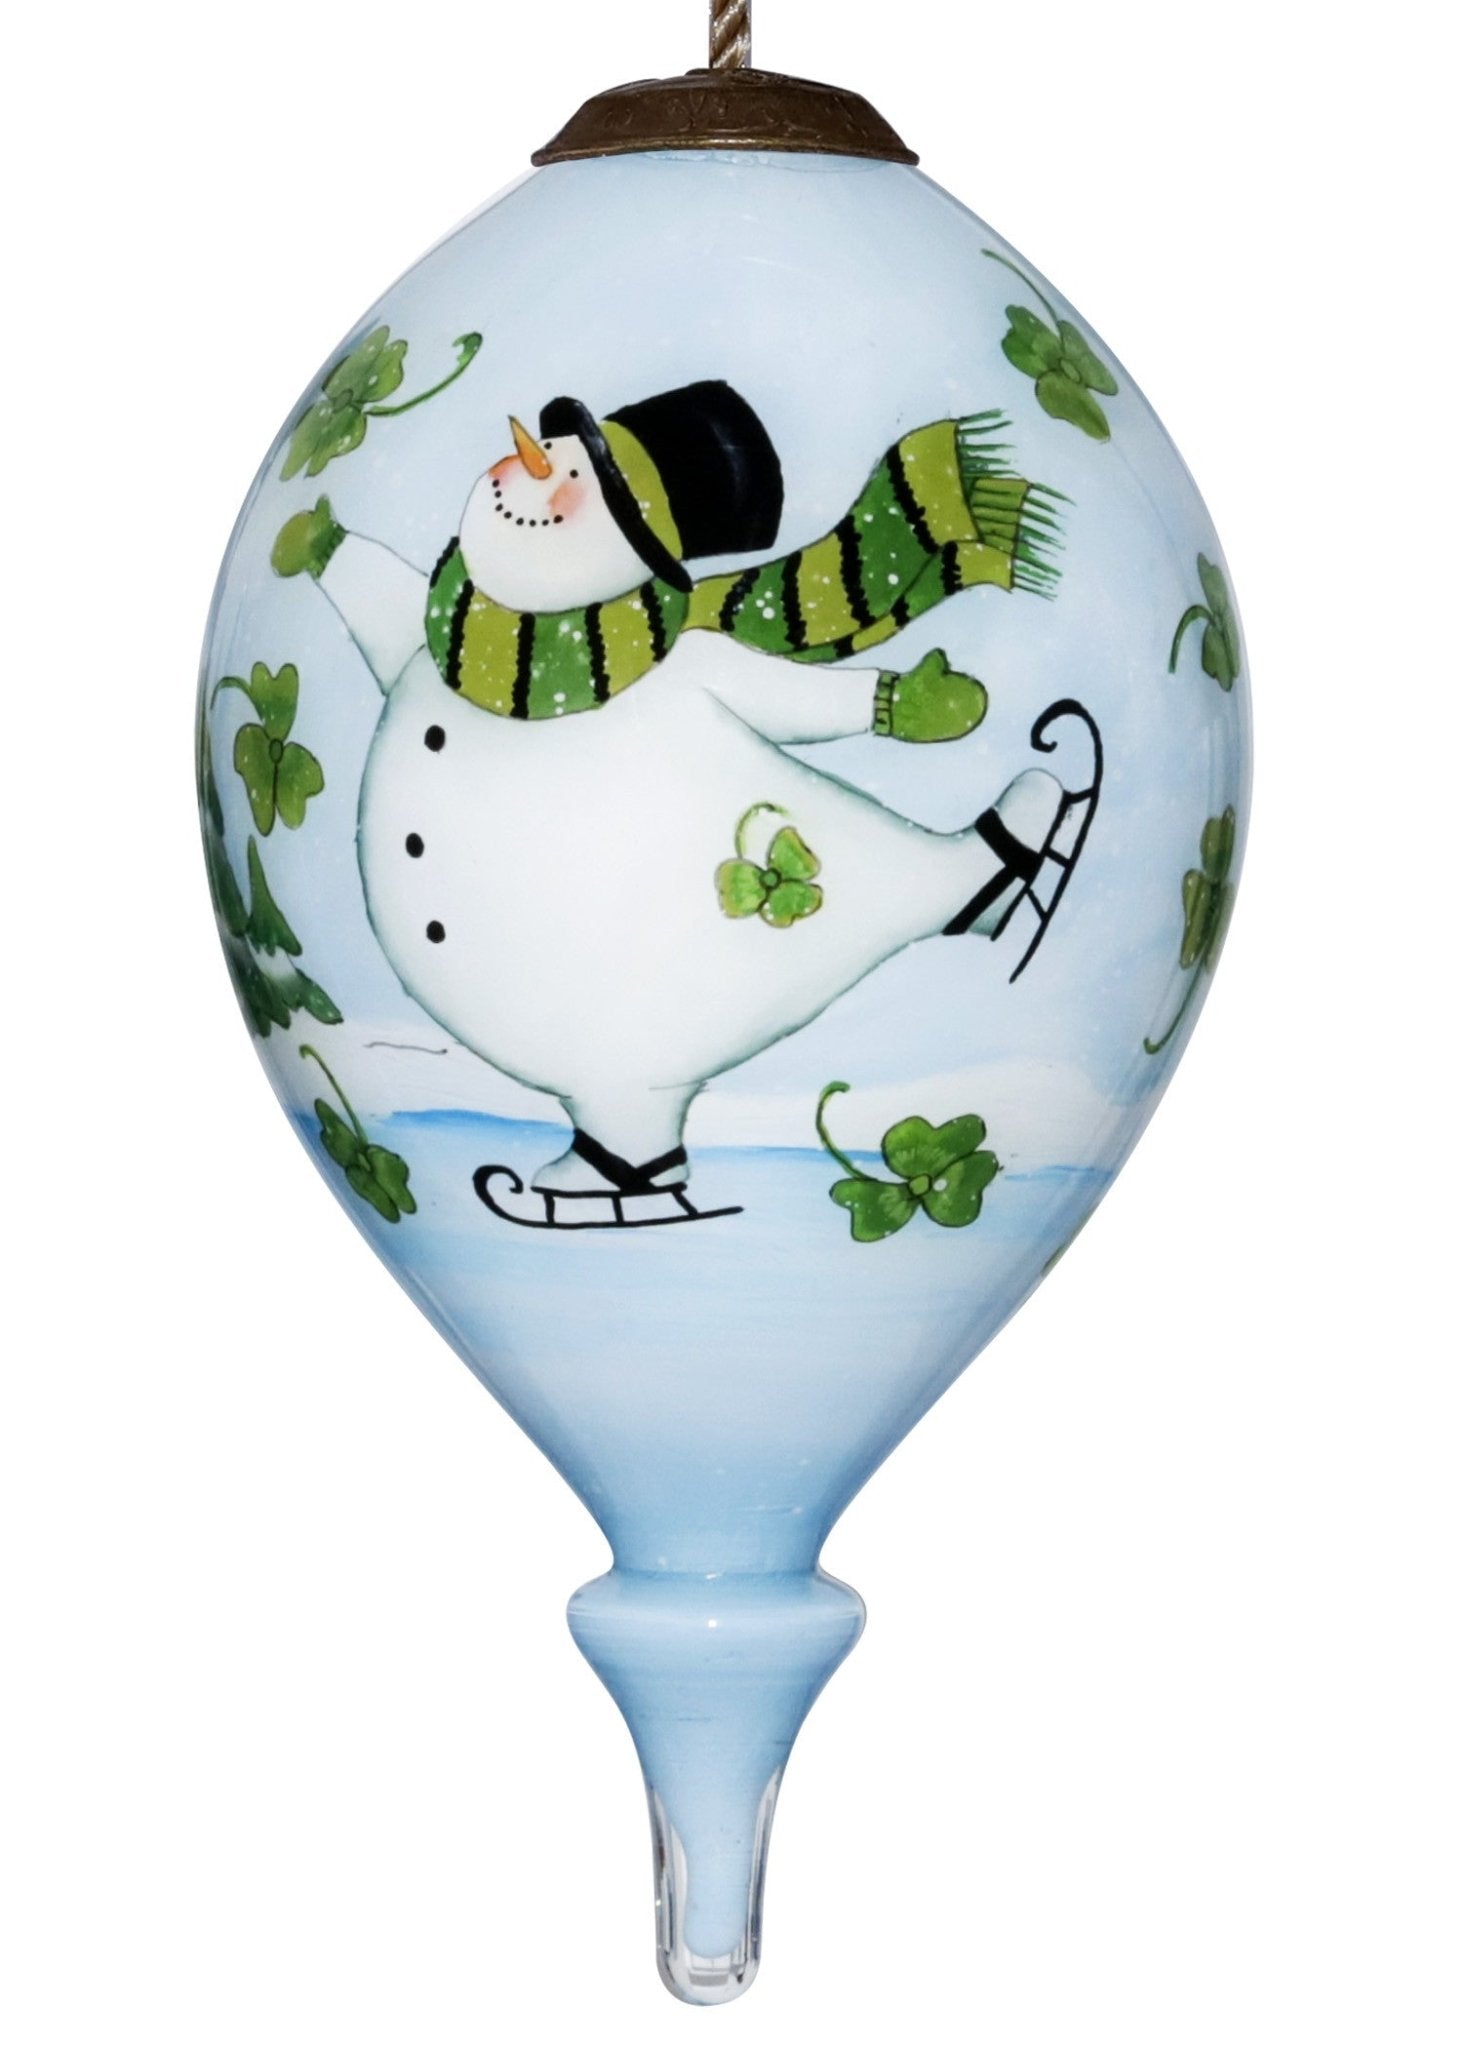 Ice-Skating-Shamrock-Snowman-Hand-Painted-Mouth-Blown-Glass-Ornament-Christmas-Ornaments